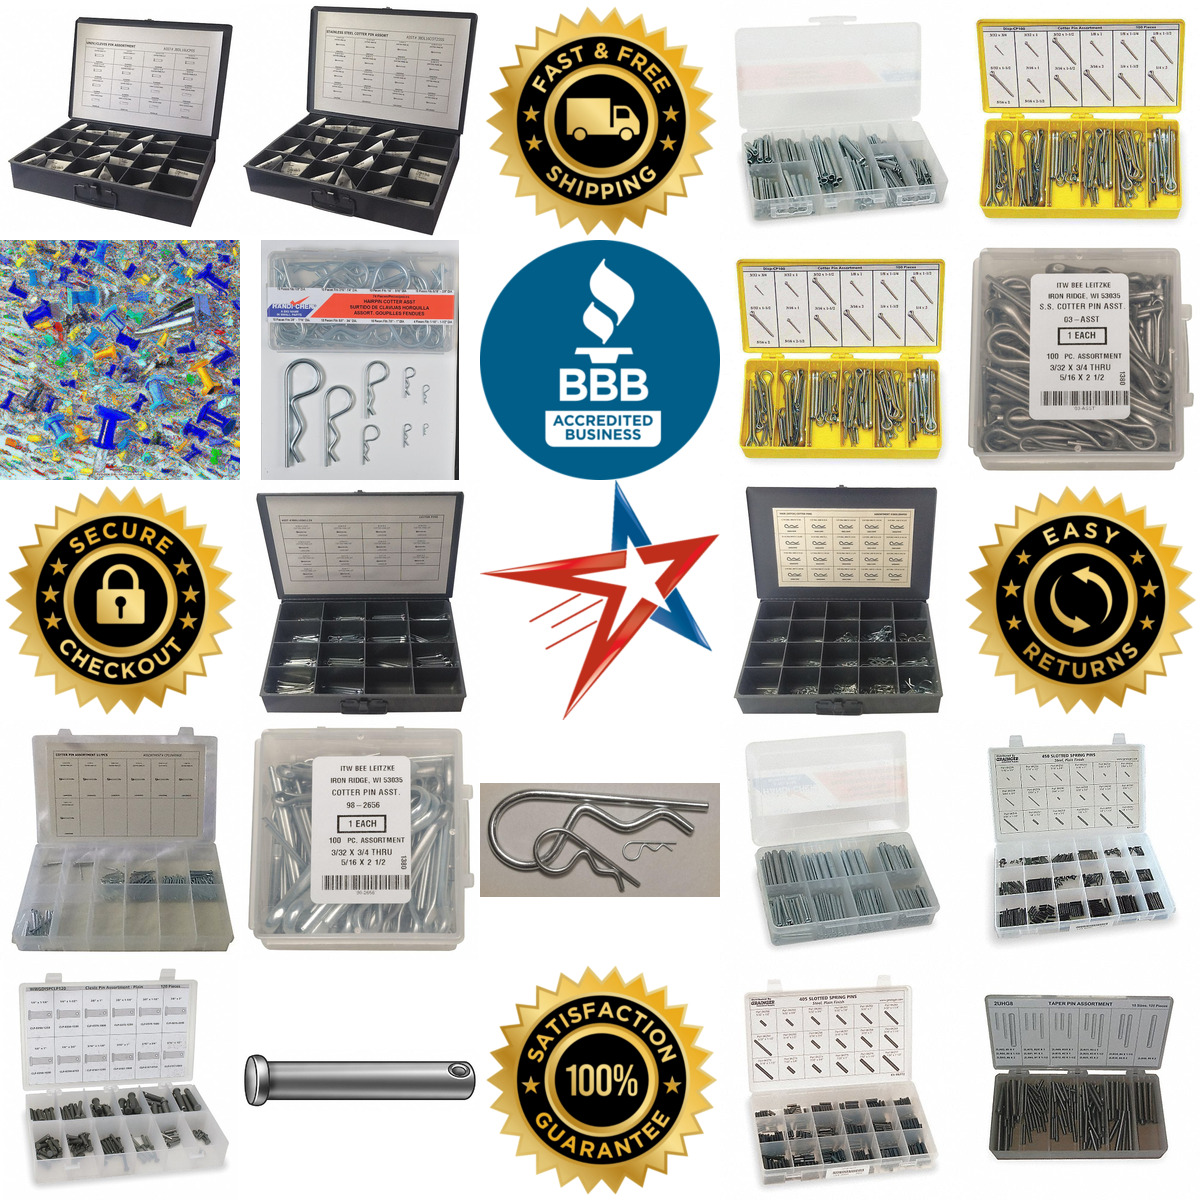 A selection of Pin Assortments products on GoVets